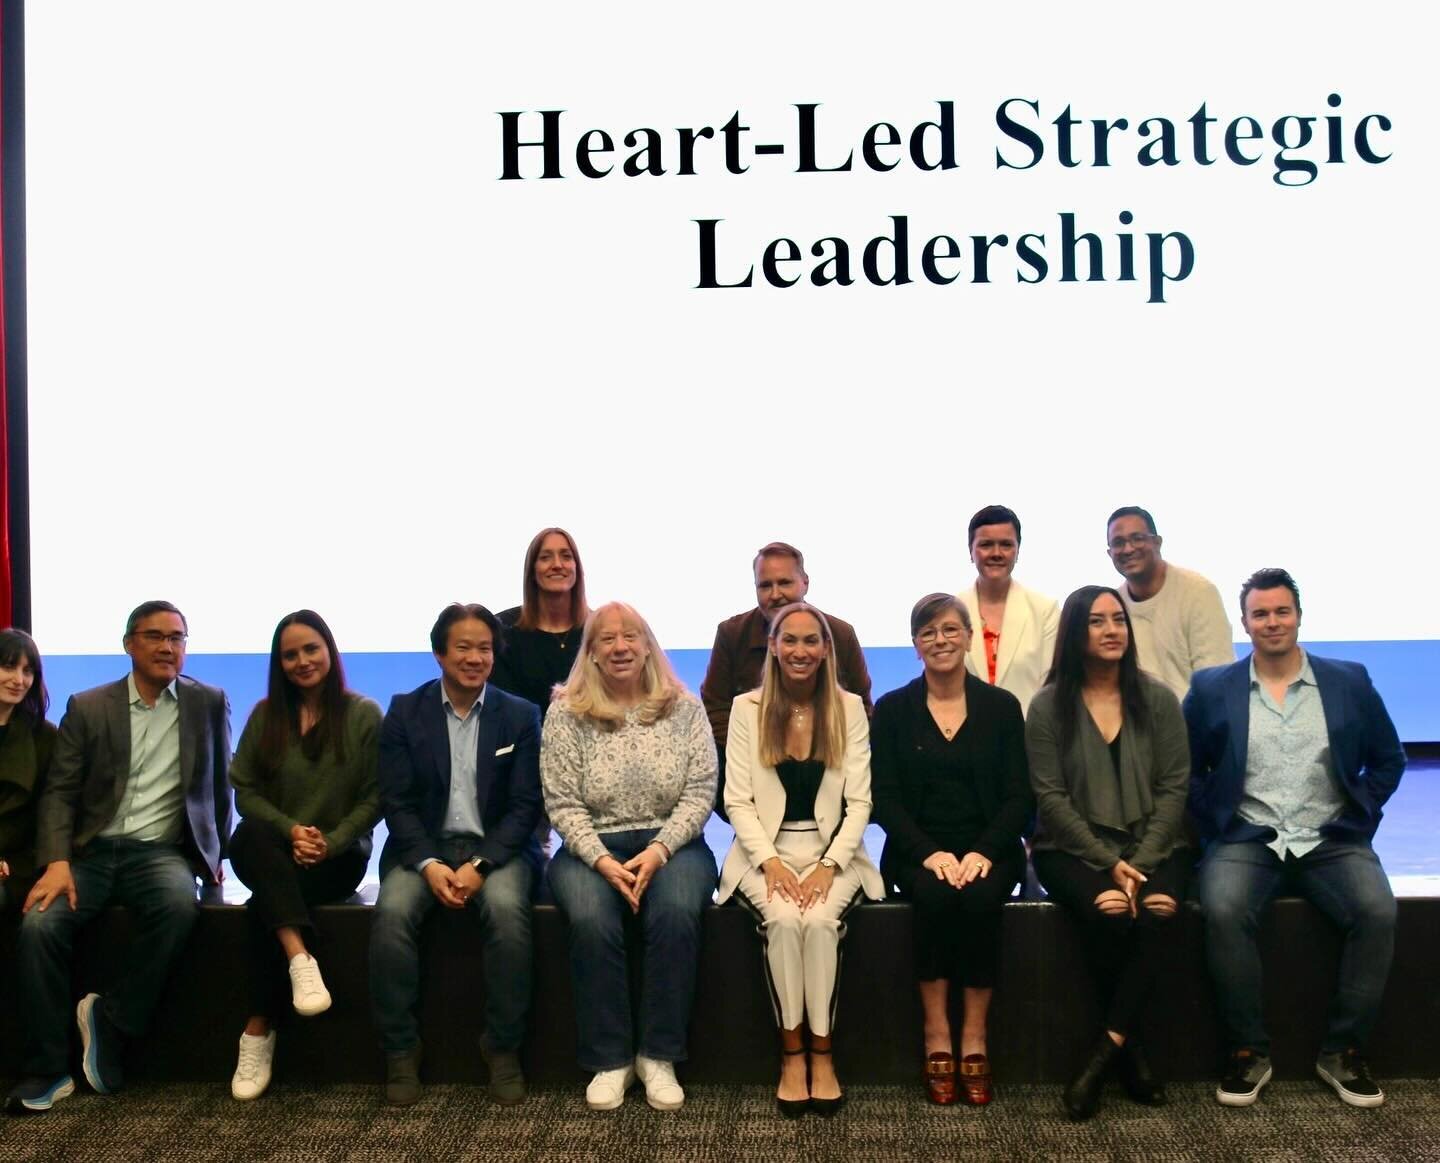 The Executive Team at @guess is amazing!  Last Friday, I facilitated a Heart-Led Strategic Leadership Workshop and we had great discussions!
..
Outcomes included:
🟣 Becoming an Emotionally Intelligent Leader
🟣 Crafting your Leadership Philosophy 
?